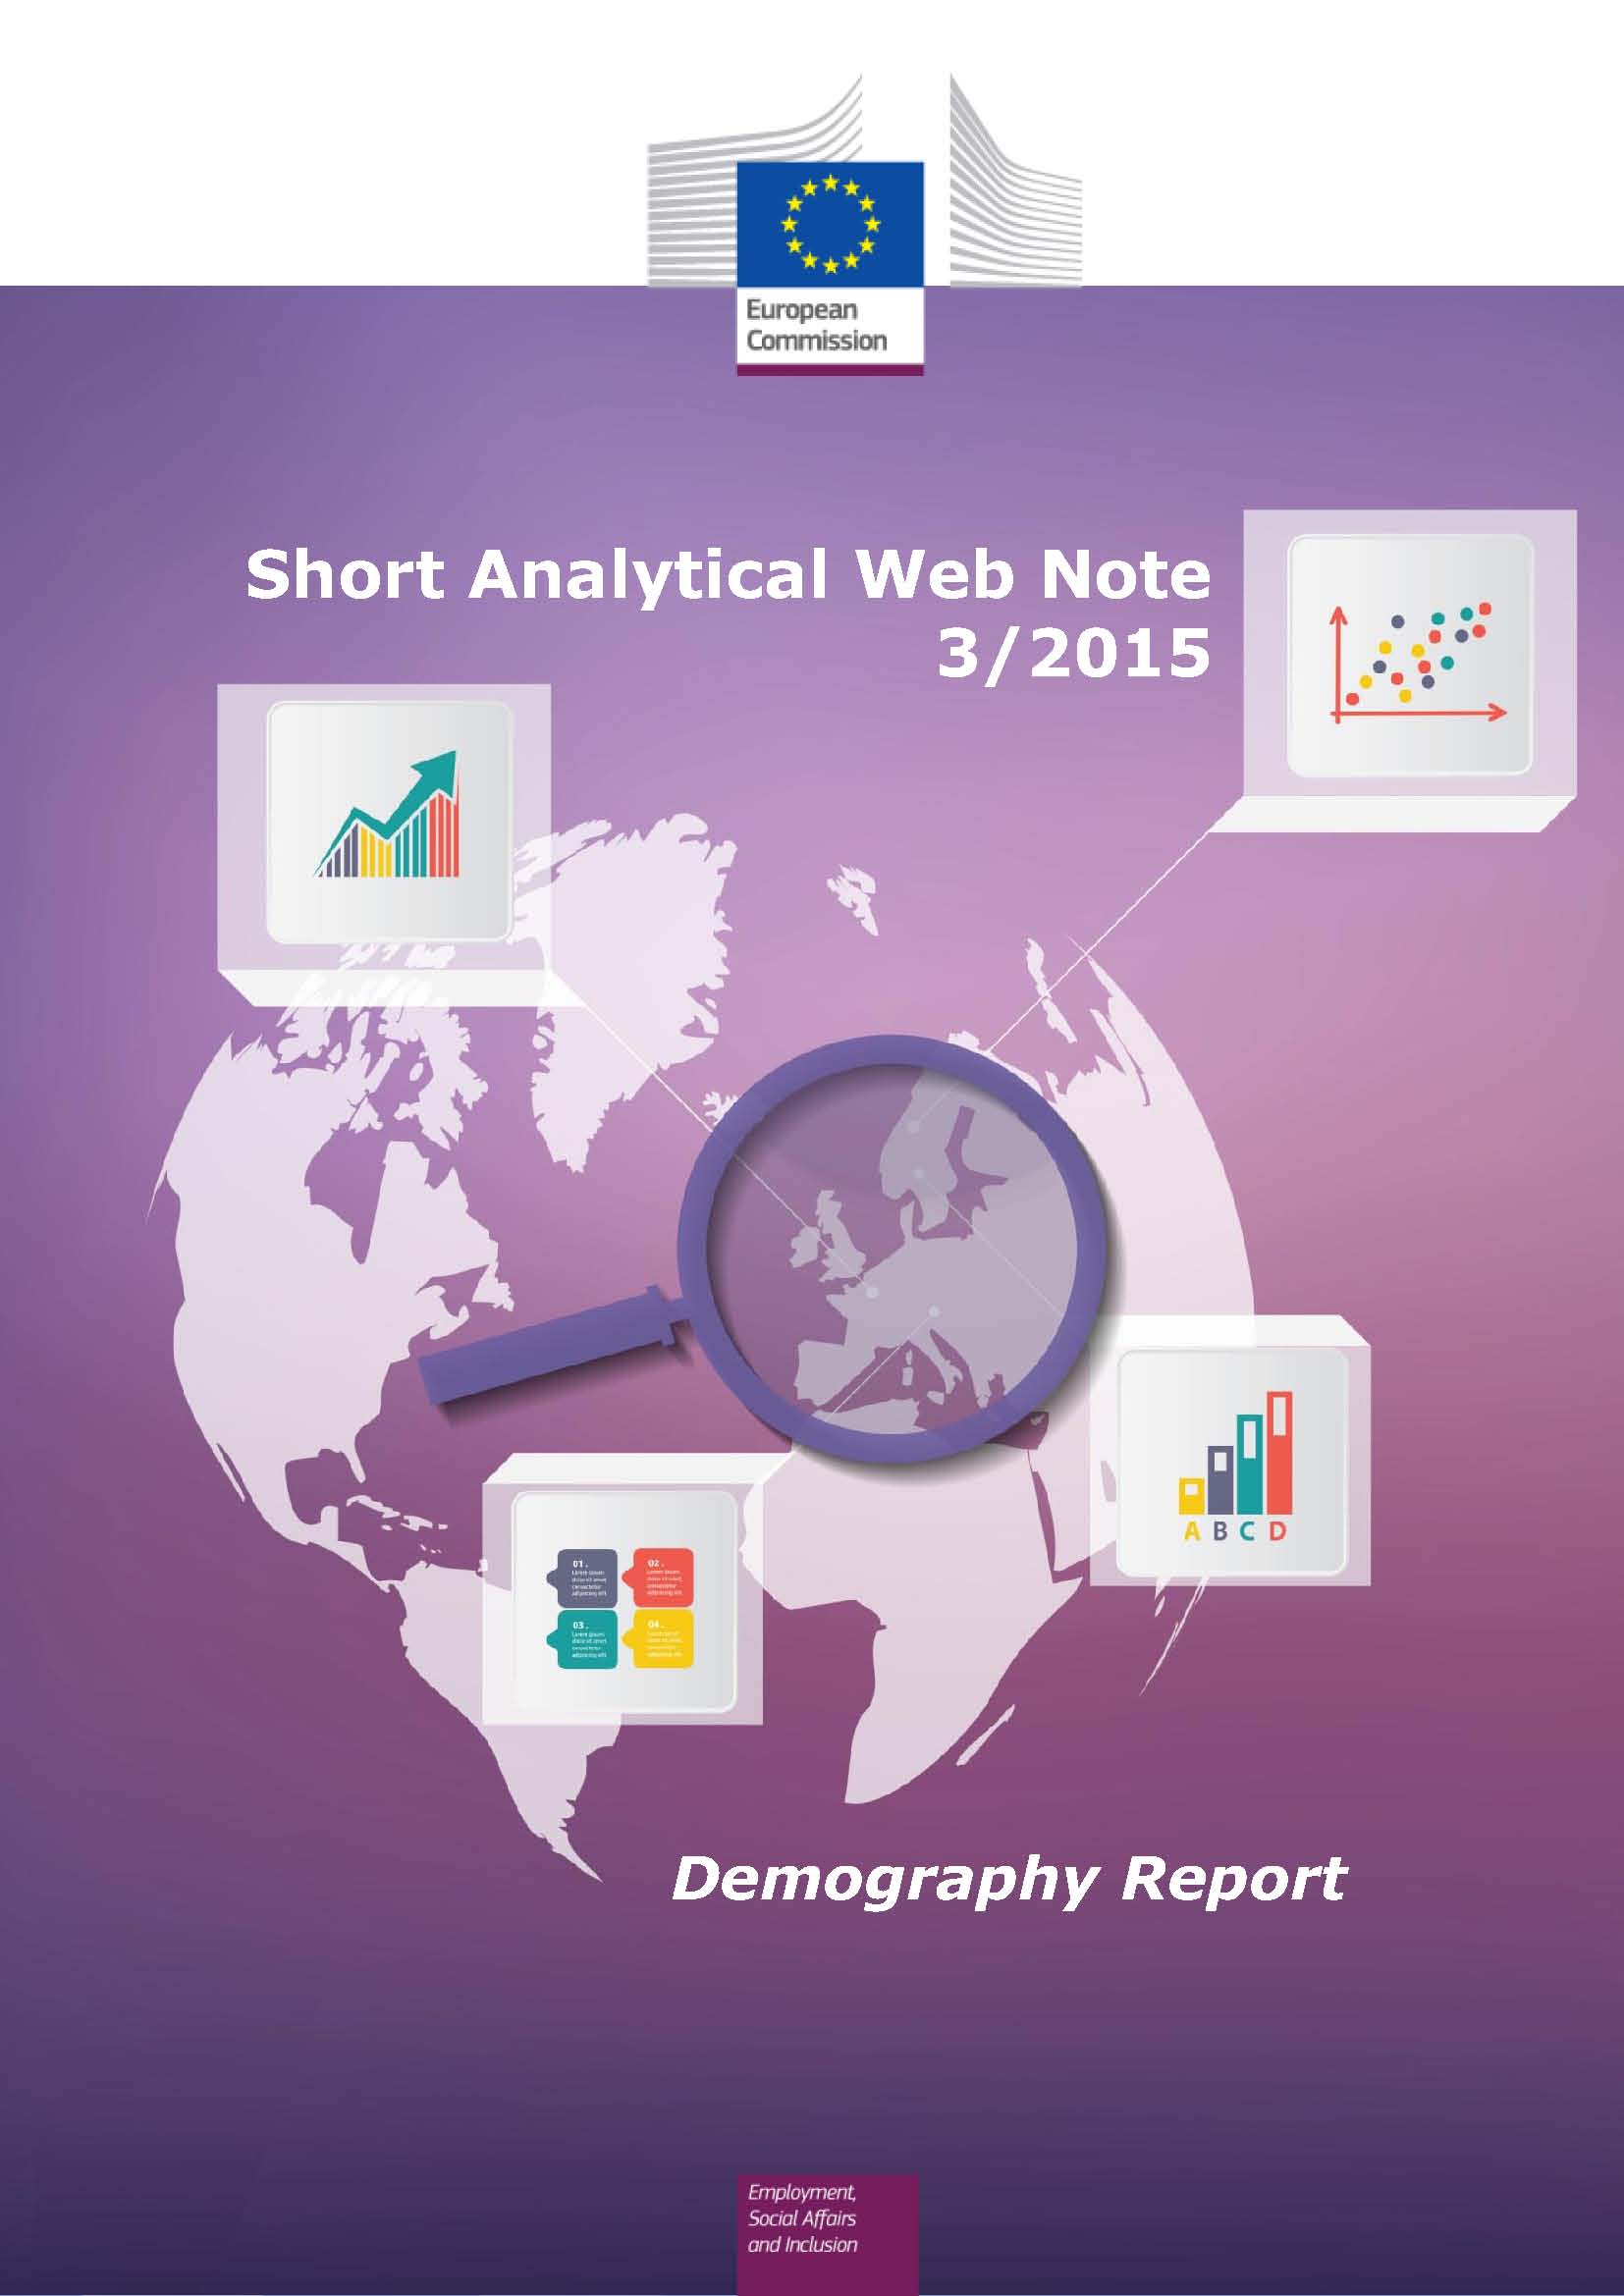 Analytical Web Note 3/2015 - Demography Report